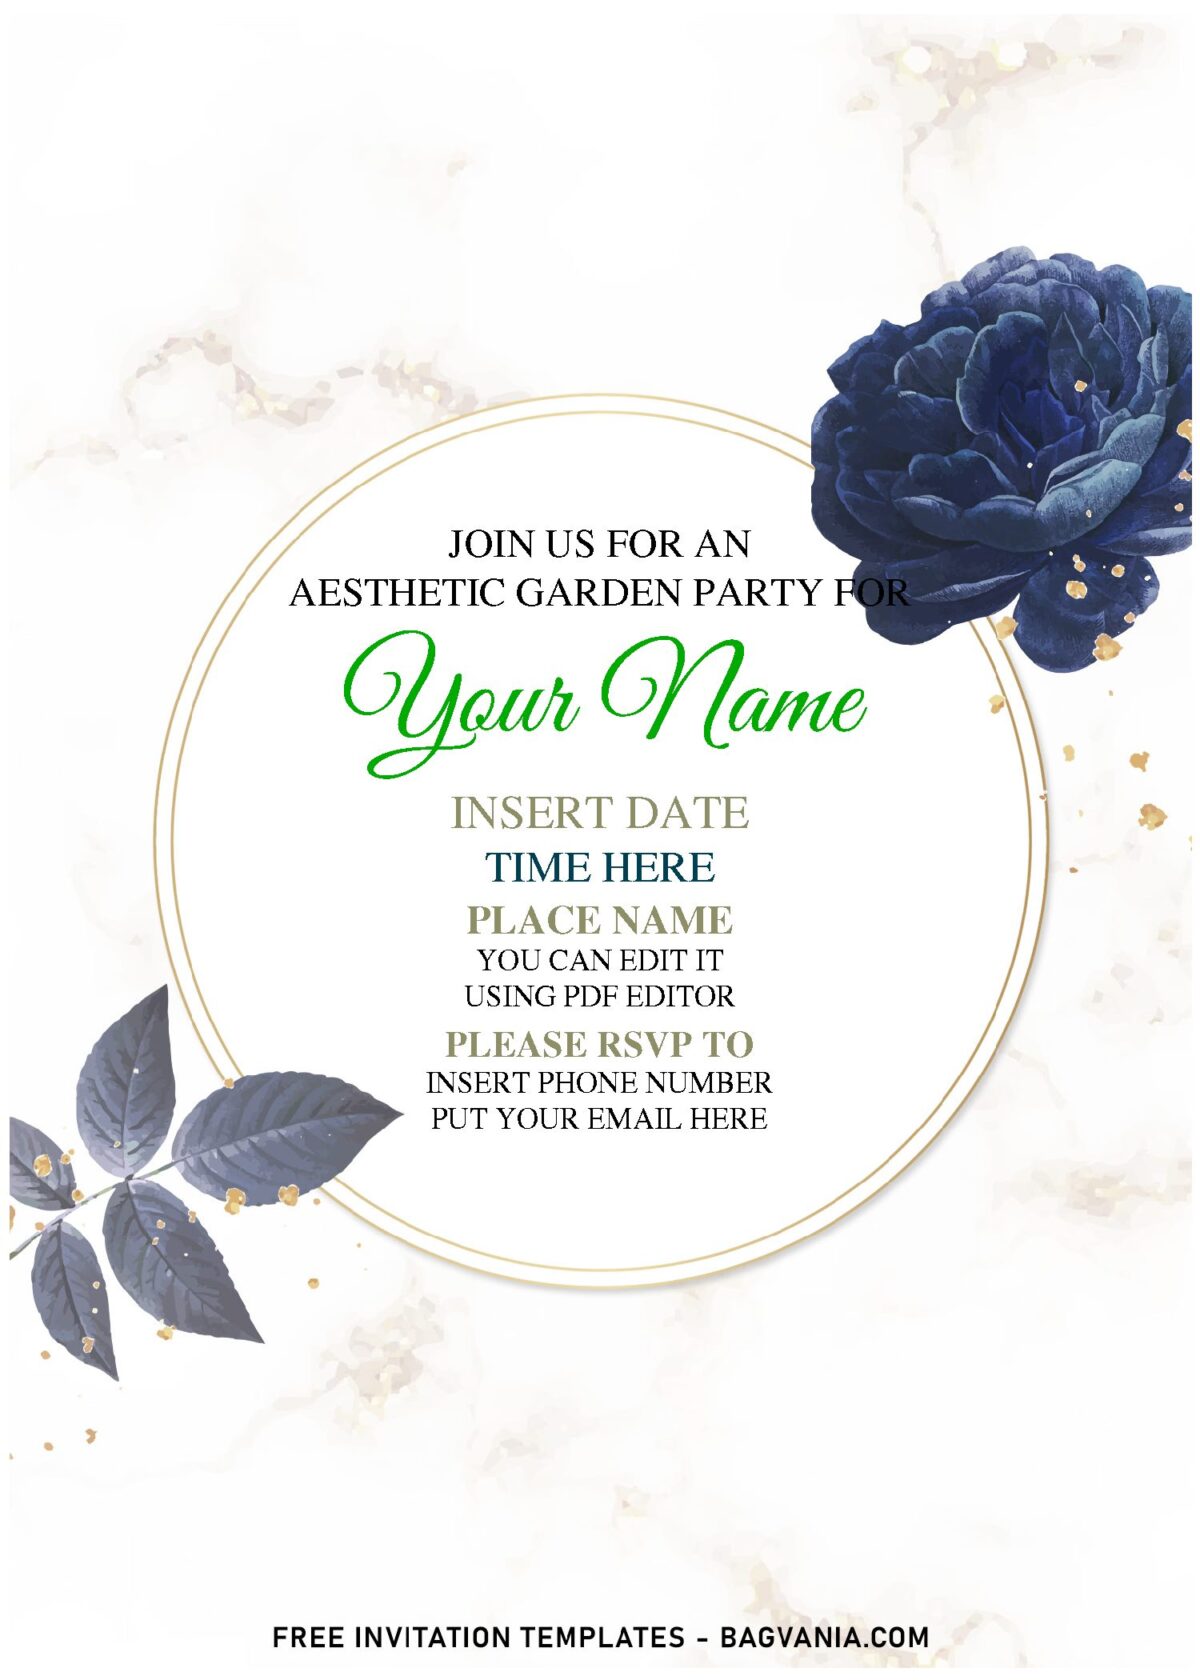 (Free Editable PDF) Dusty Marble Camellia And Miller Birthday Invitation Templates with blue foliage